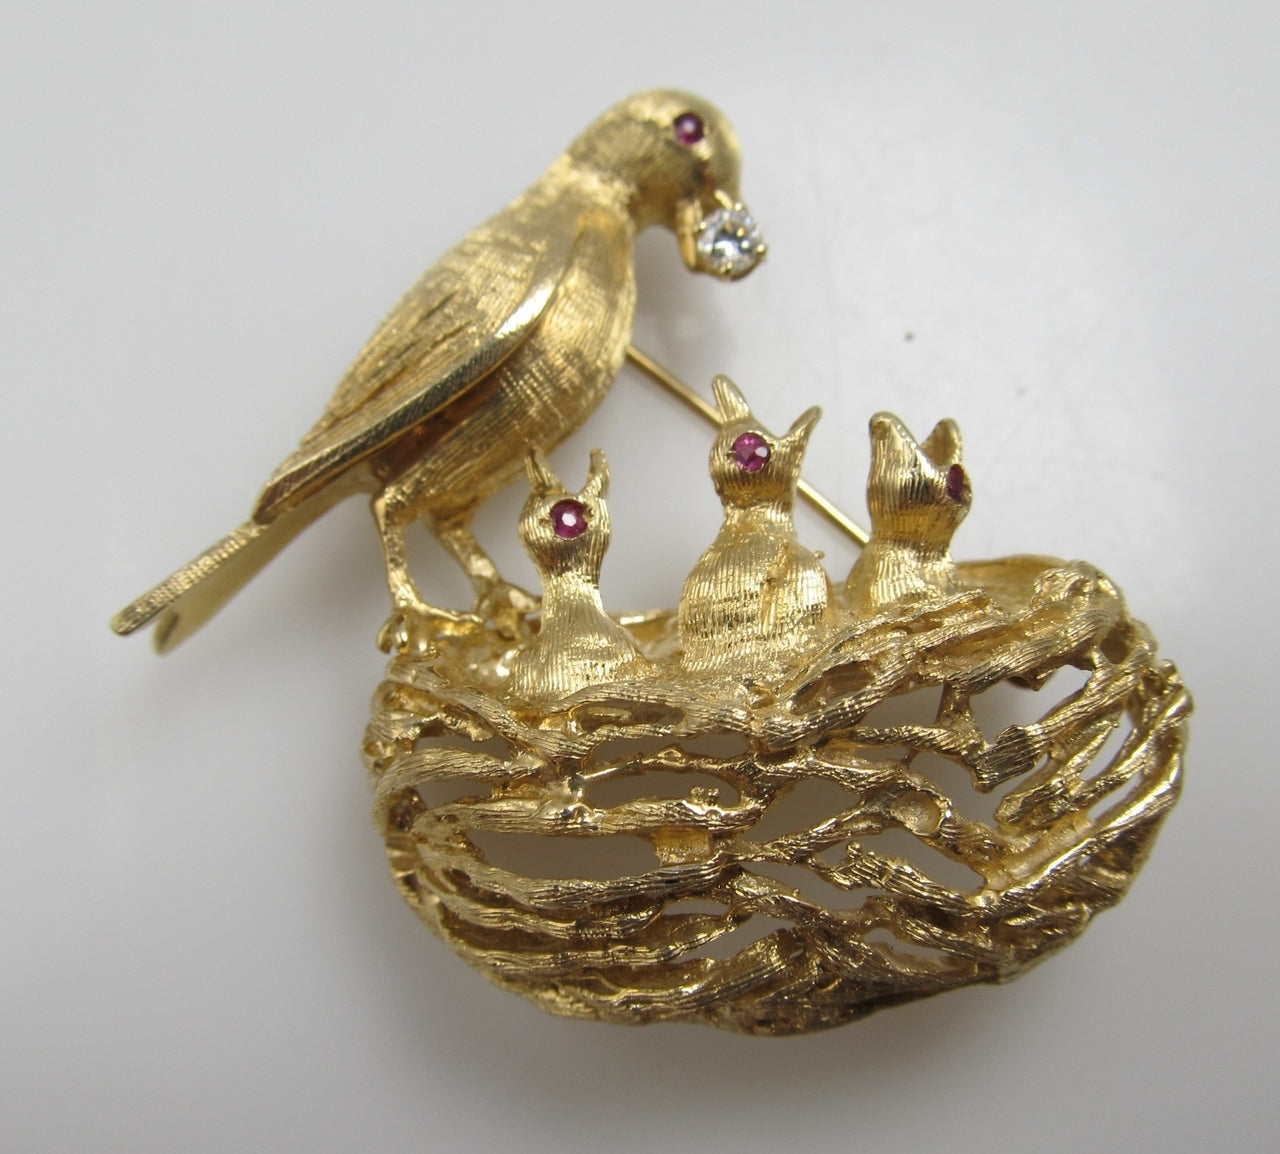 14k yellow gold bird and nest pin with rubies and a diamond, circa 1960